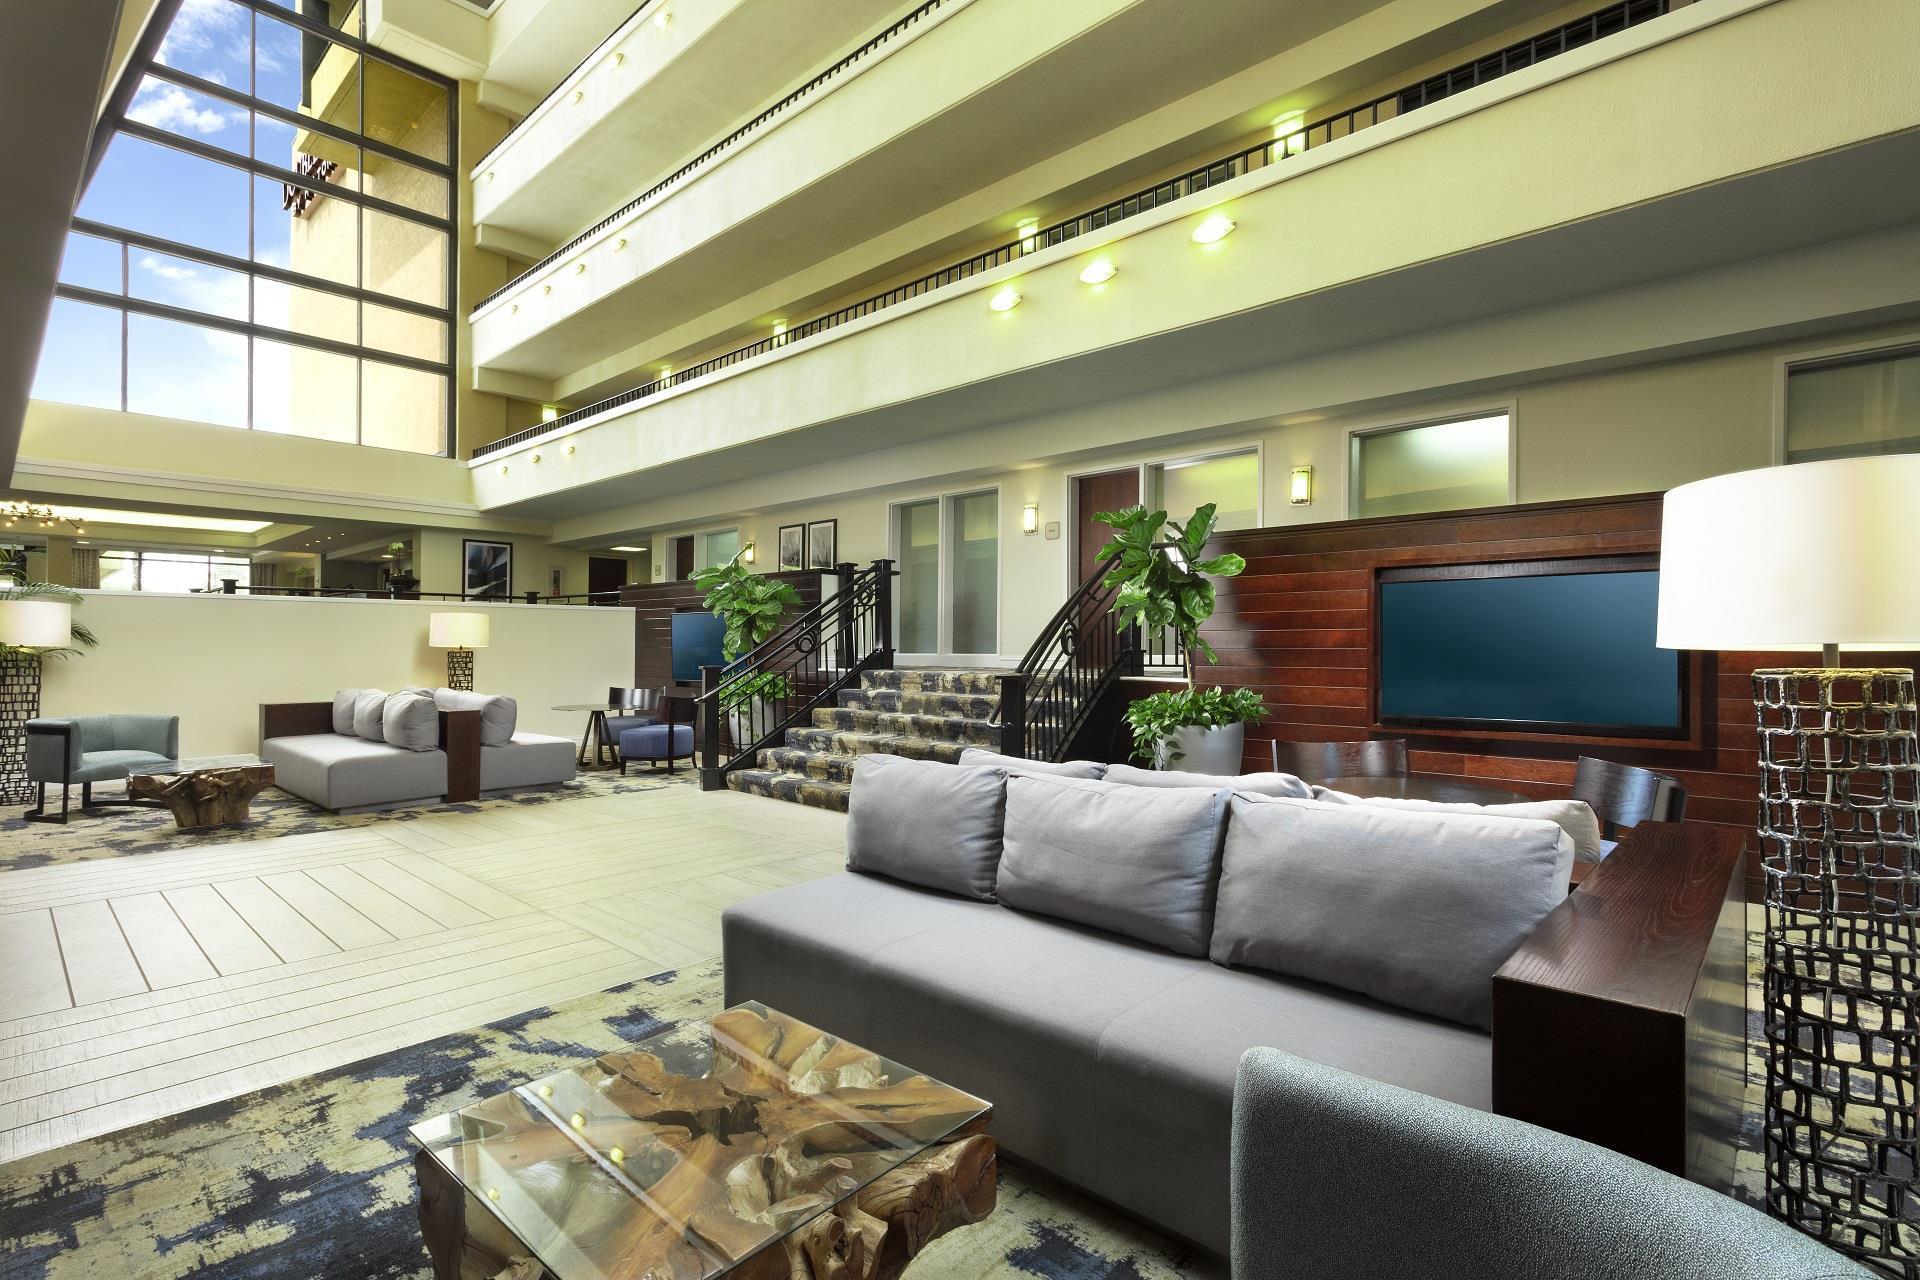 DoubleTree by Hilton Hotel Columbia, South Carolina in Columbia, SC